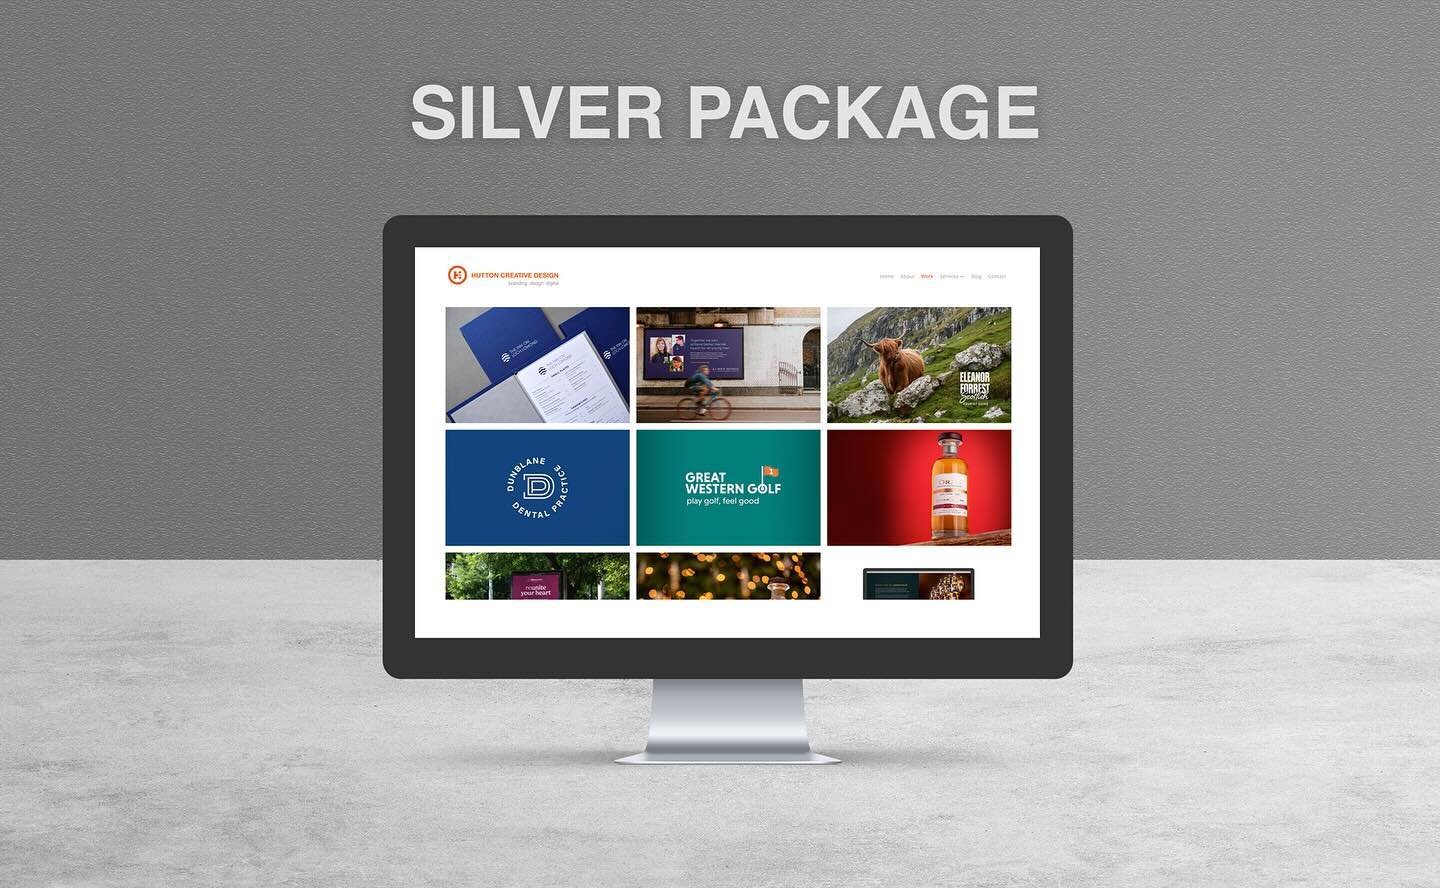 Affordable Excellence: Tailored Websites for Every Budget - Silver Level

Today marks a significant shift in how you can acquire a cost-effective website tailored to your budget, especially amidst the current cost of living crisis impacting marketing